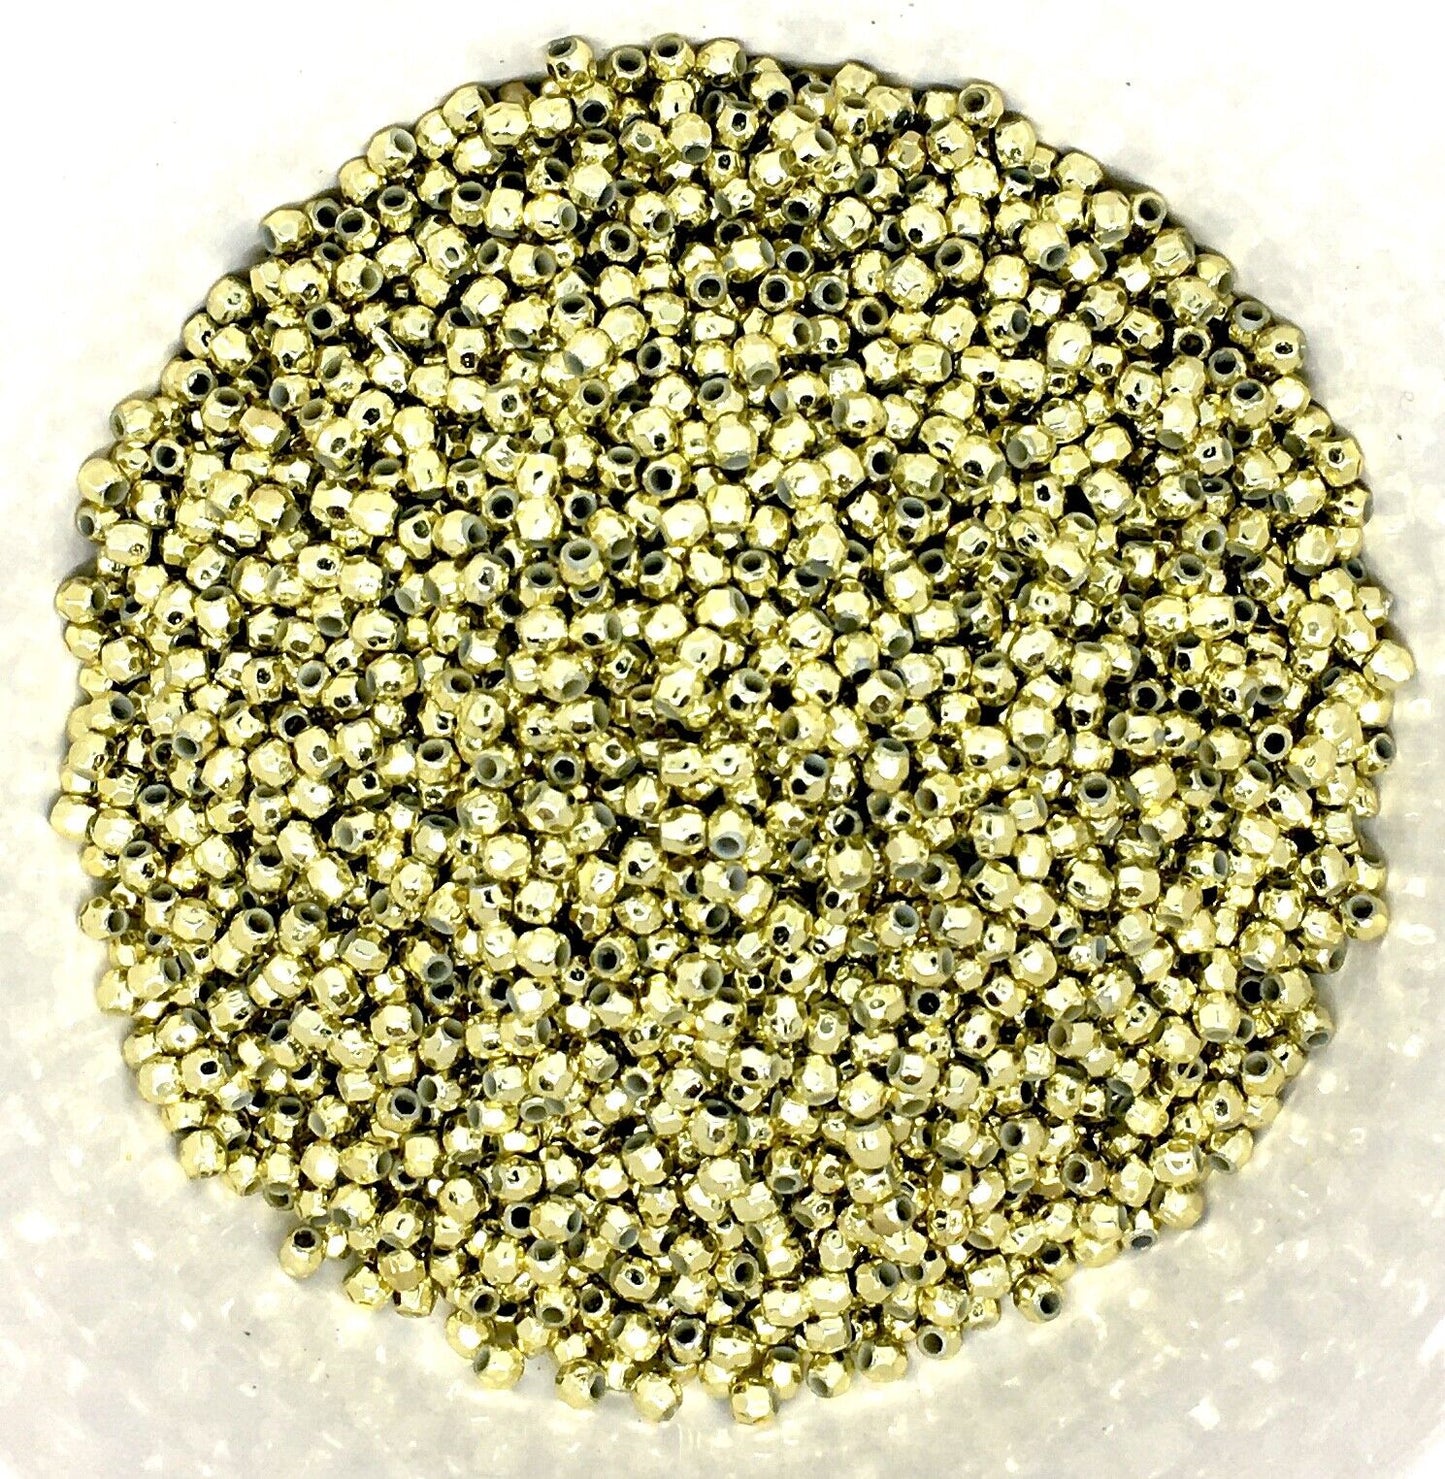 500x Golden Faceted Hexagon 3mm Acrylic Spacer Beads